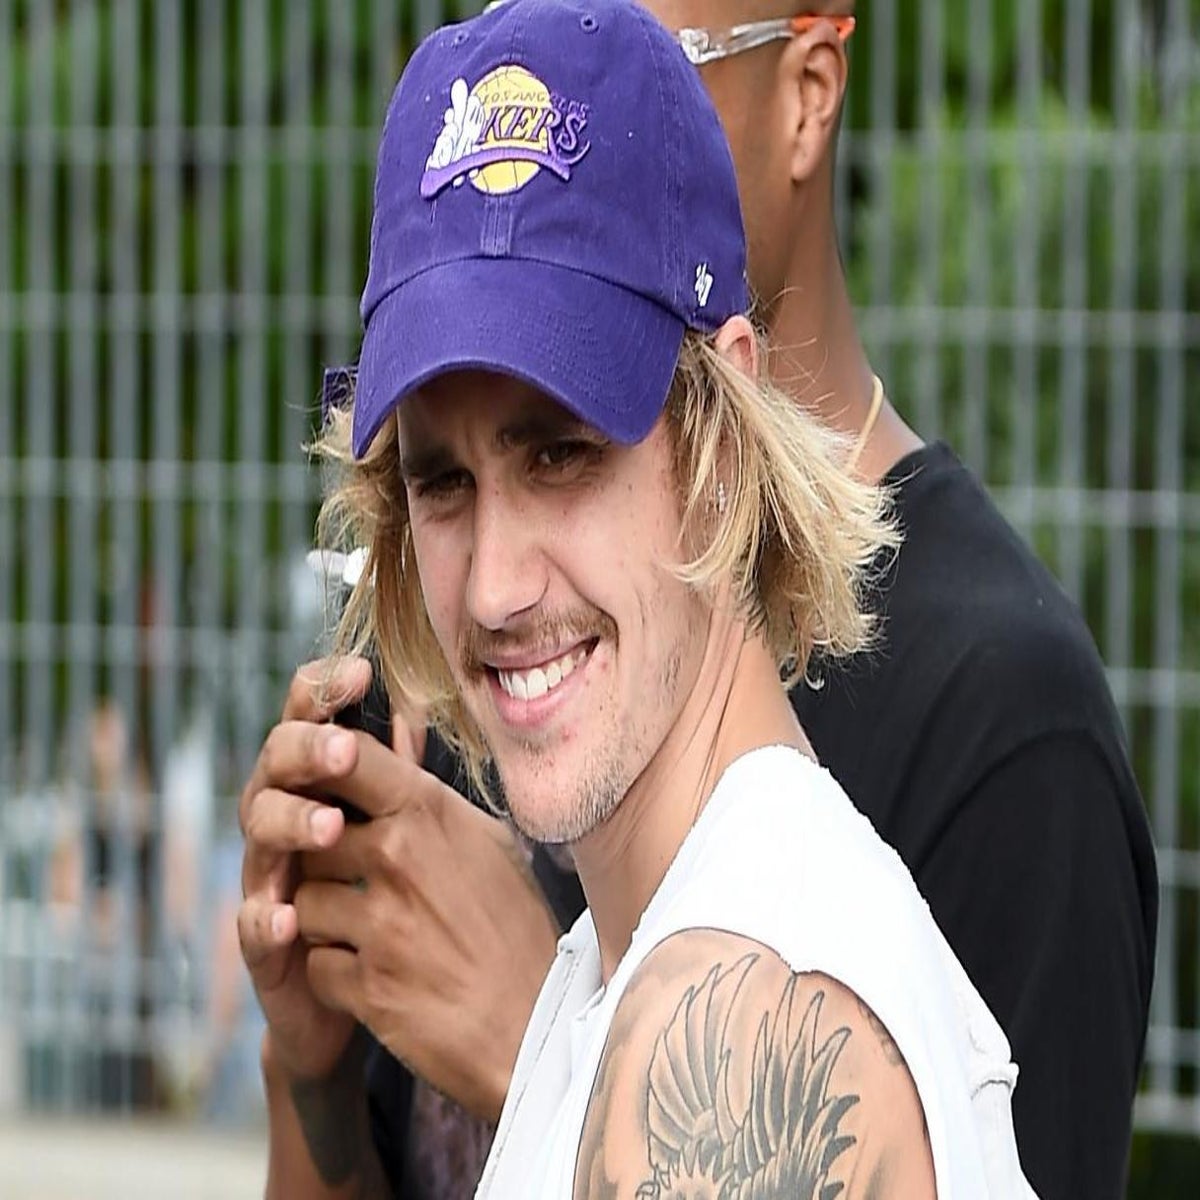 Don't Look, Scott! Justin Bieber Shows Off His Assets In Soaked